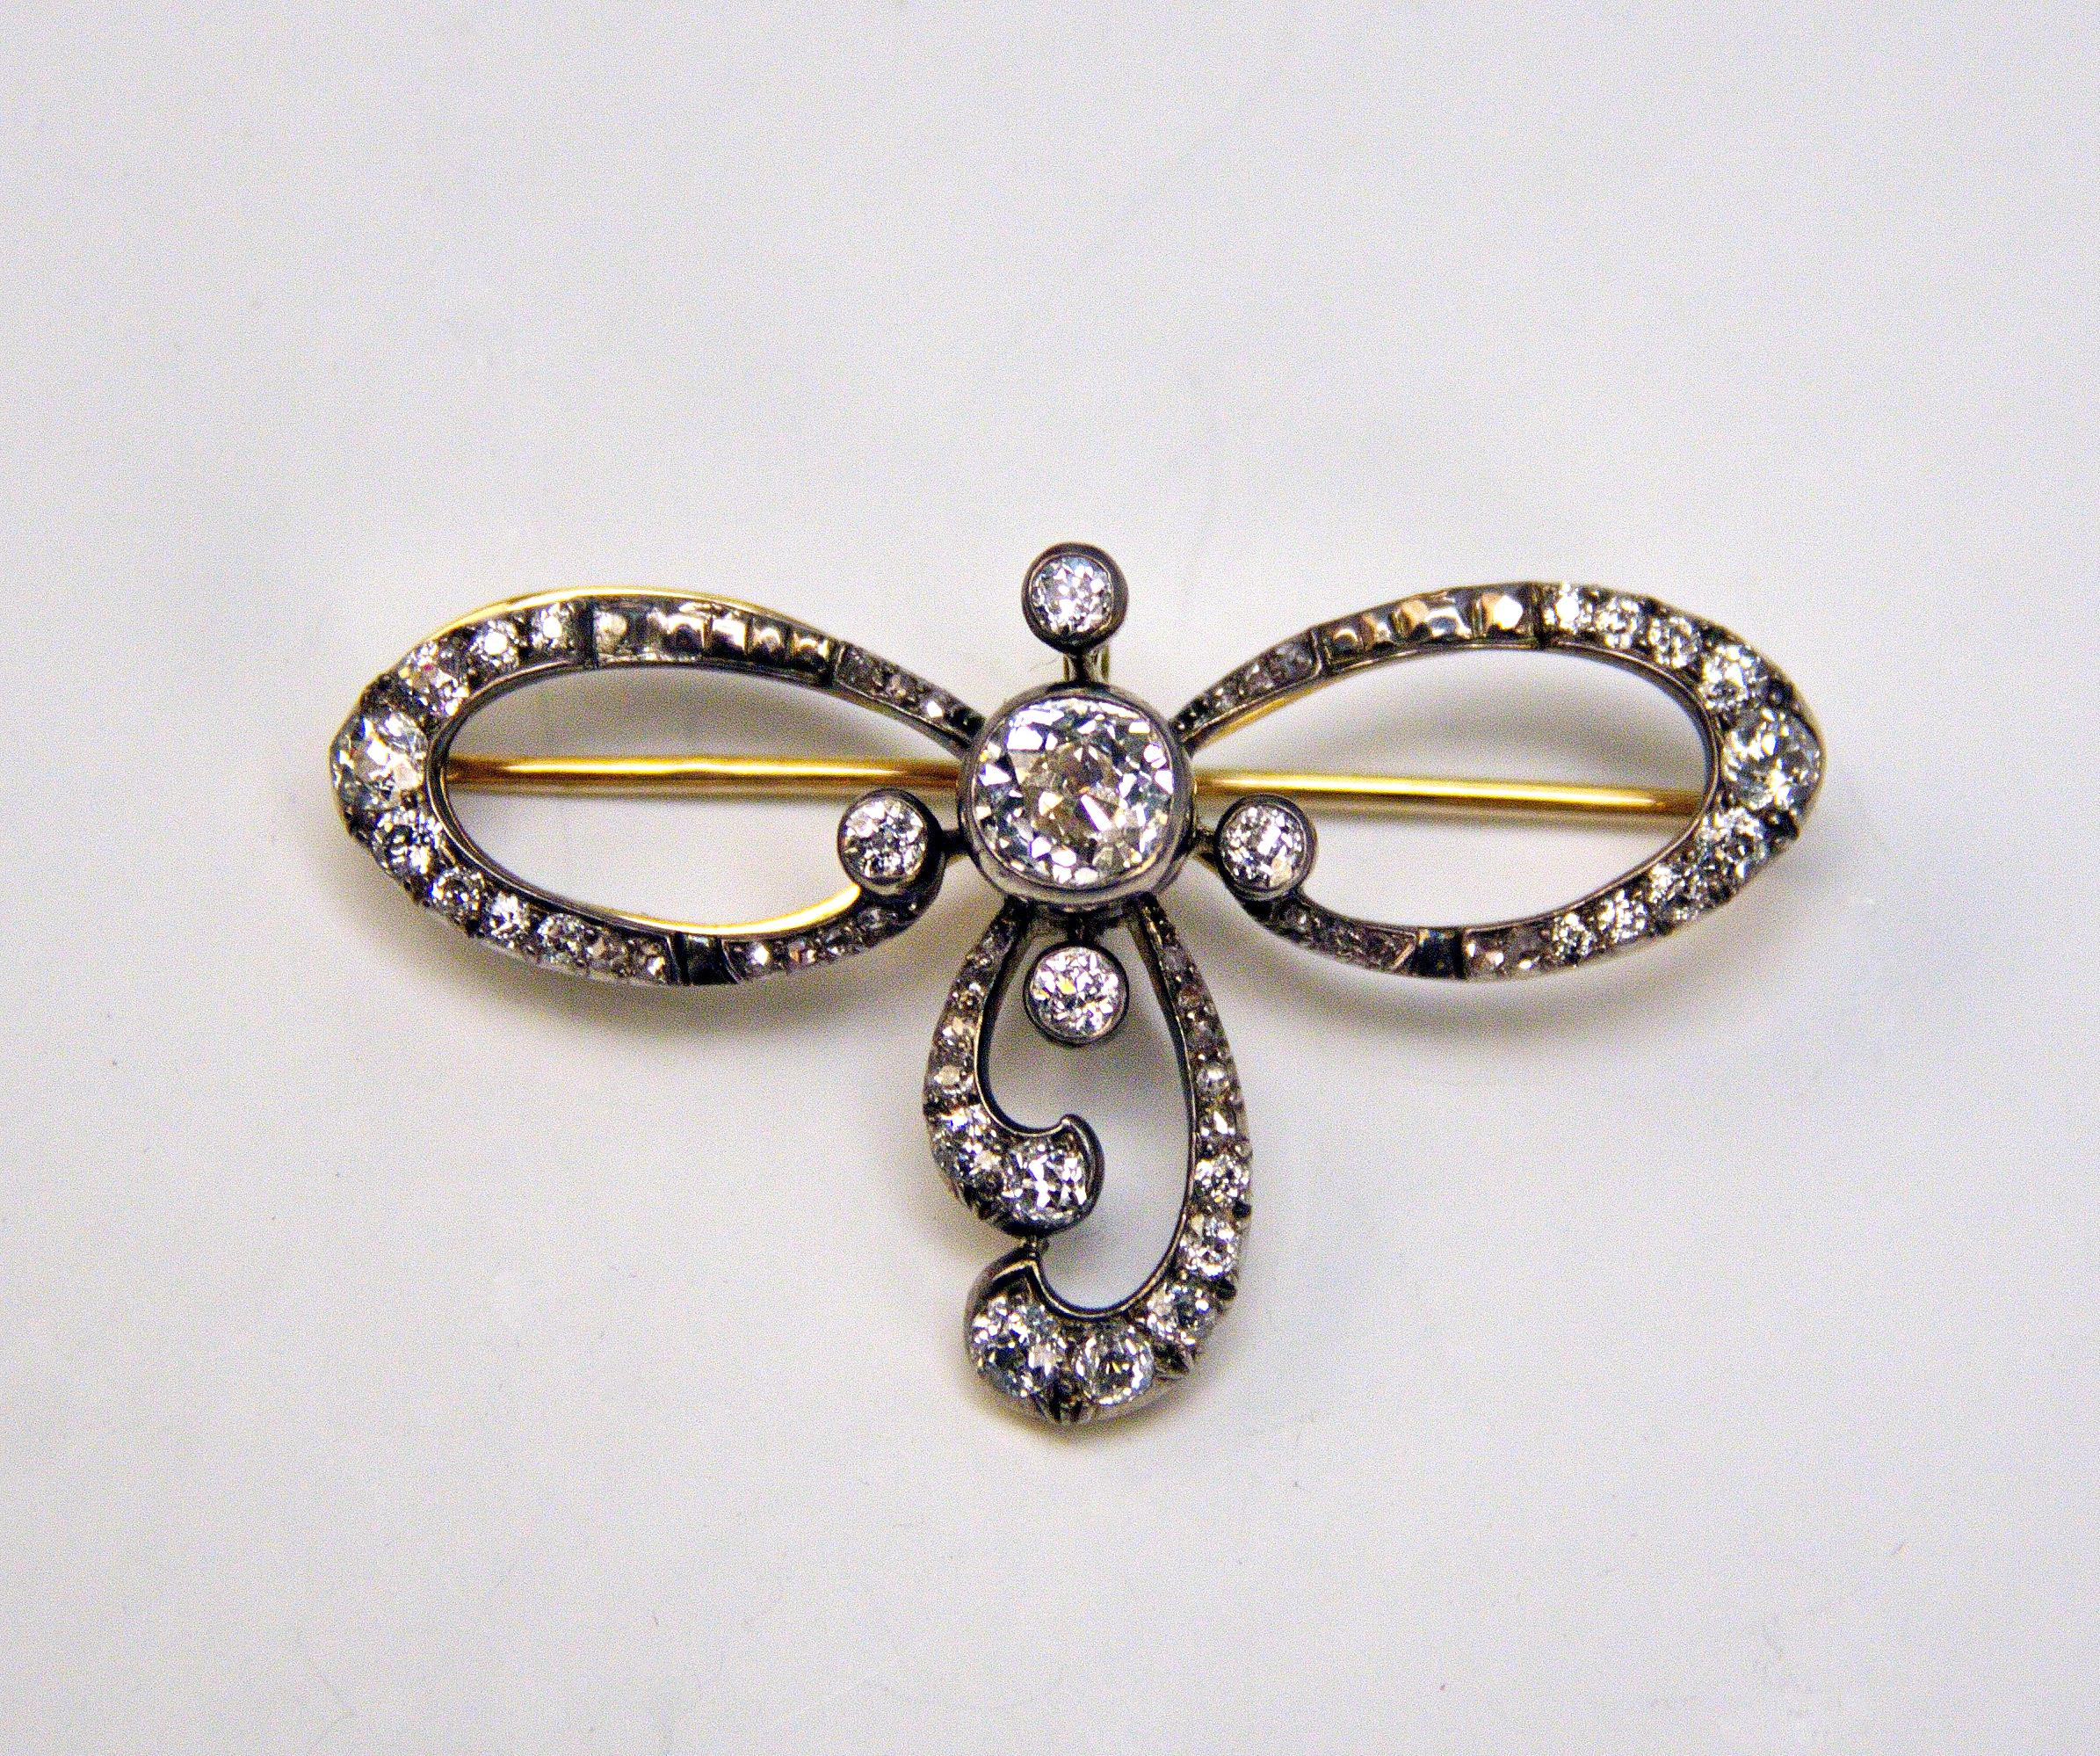 Golden Art Nouveau Brooch of most elegant appearance, manufactured as following: It is looking like a mesh/bow covered with many diamonds.
PLEASE NOTE: The brooch can be used as pendant, too, since it has a small ring at reverse side to which a